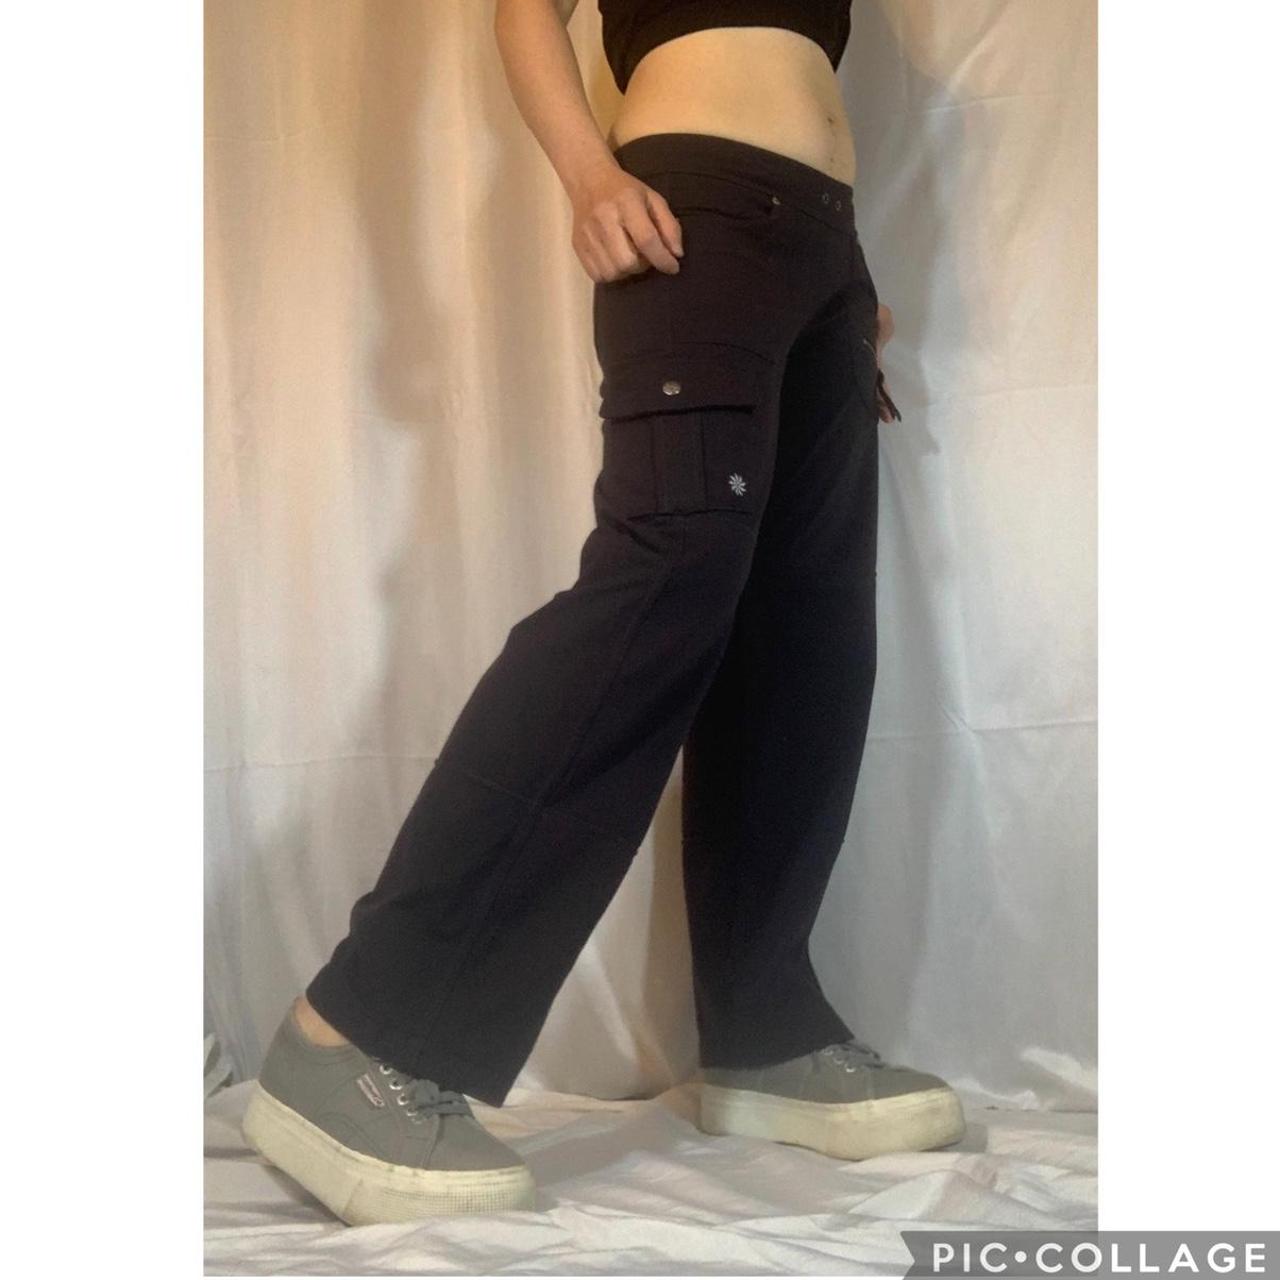 Product Image 1 - Black low rise cargo pants(b1)
Wide